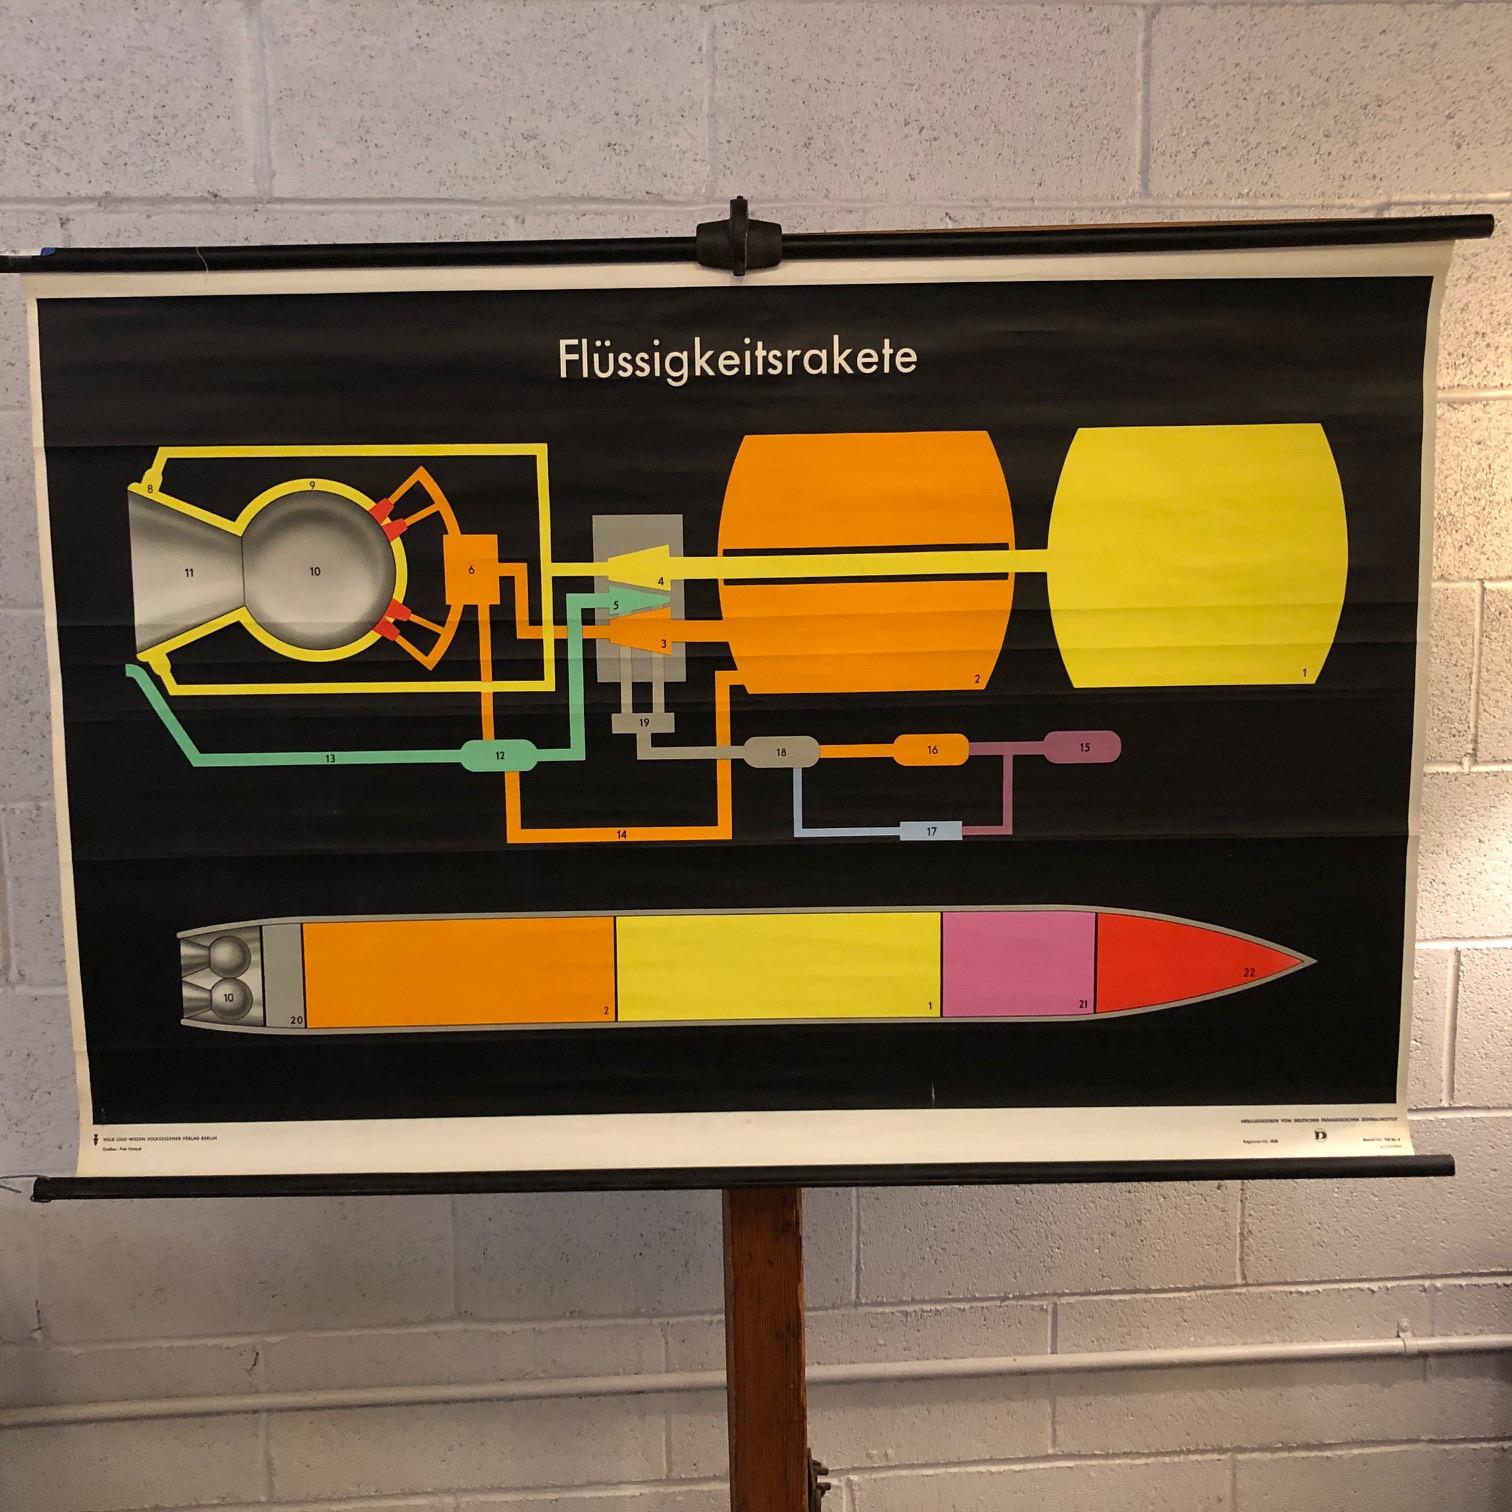 Vintage, German, scientific, engineering, roll down chart depicting the construction
of a liquid rocket engine (Flussigkeitsrakete) is printed on canvas backed paper on wood rods.